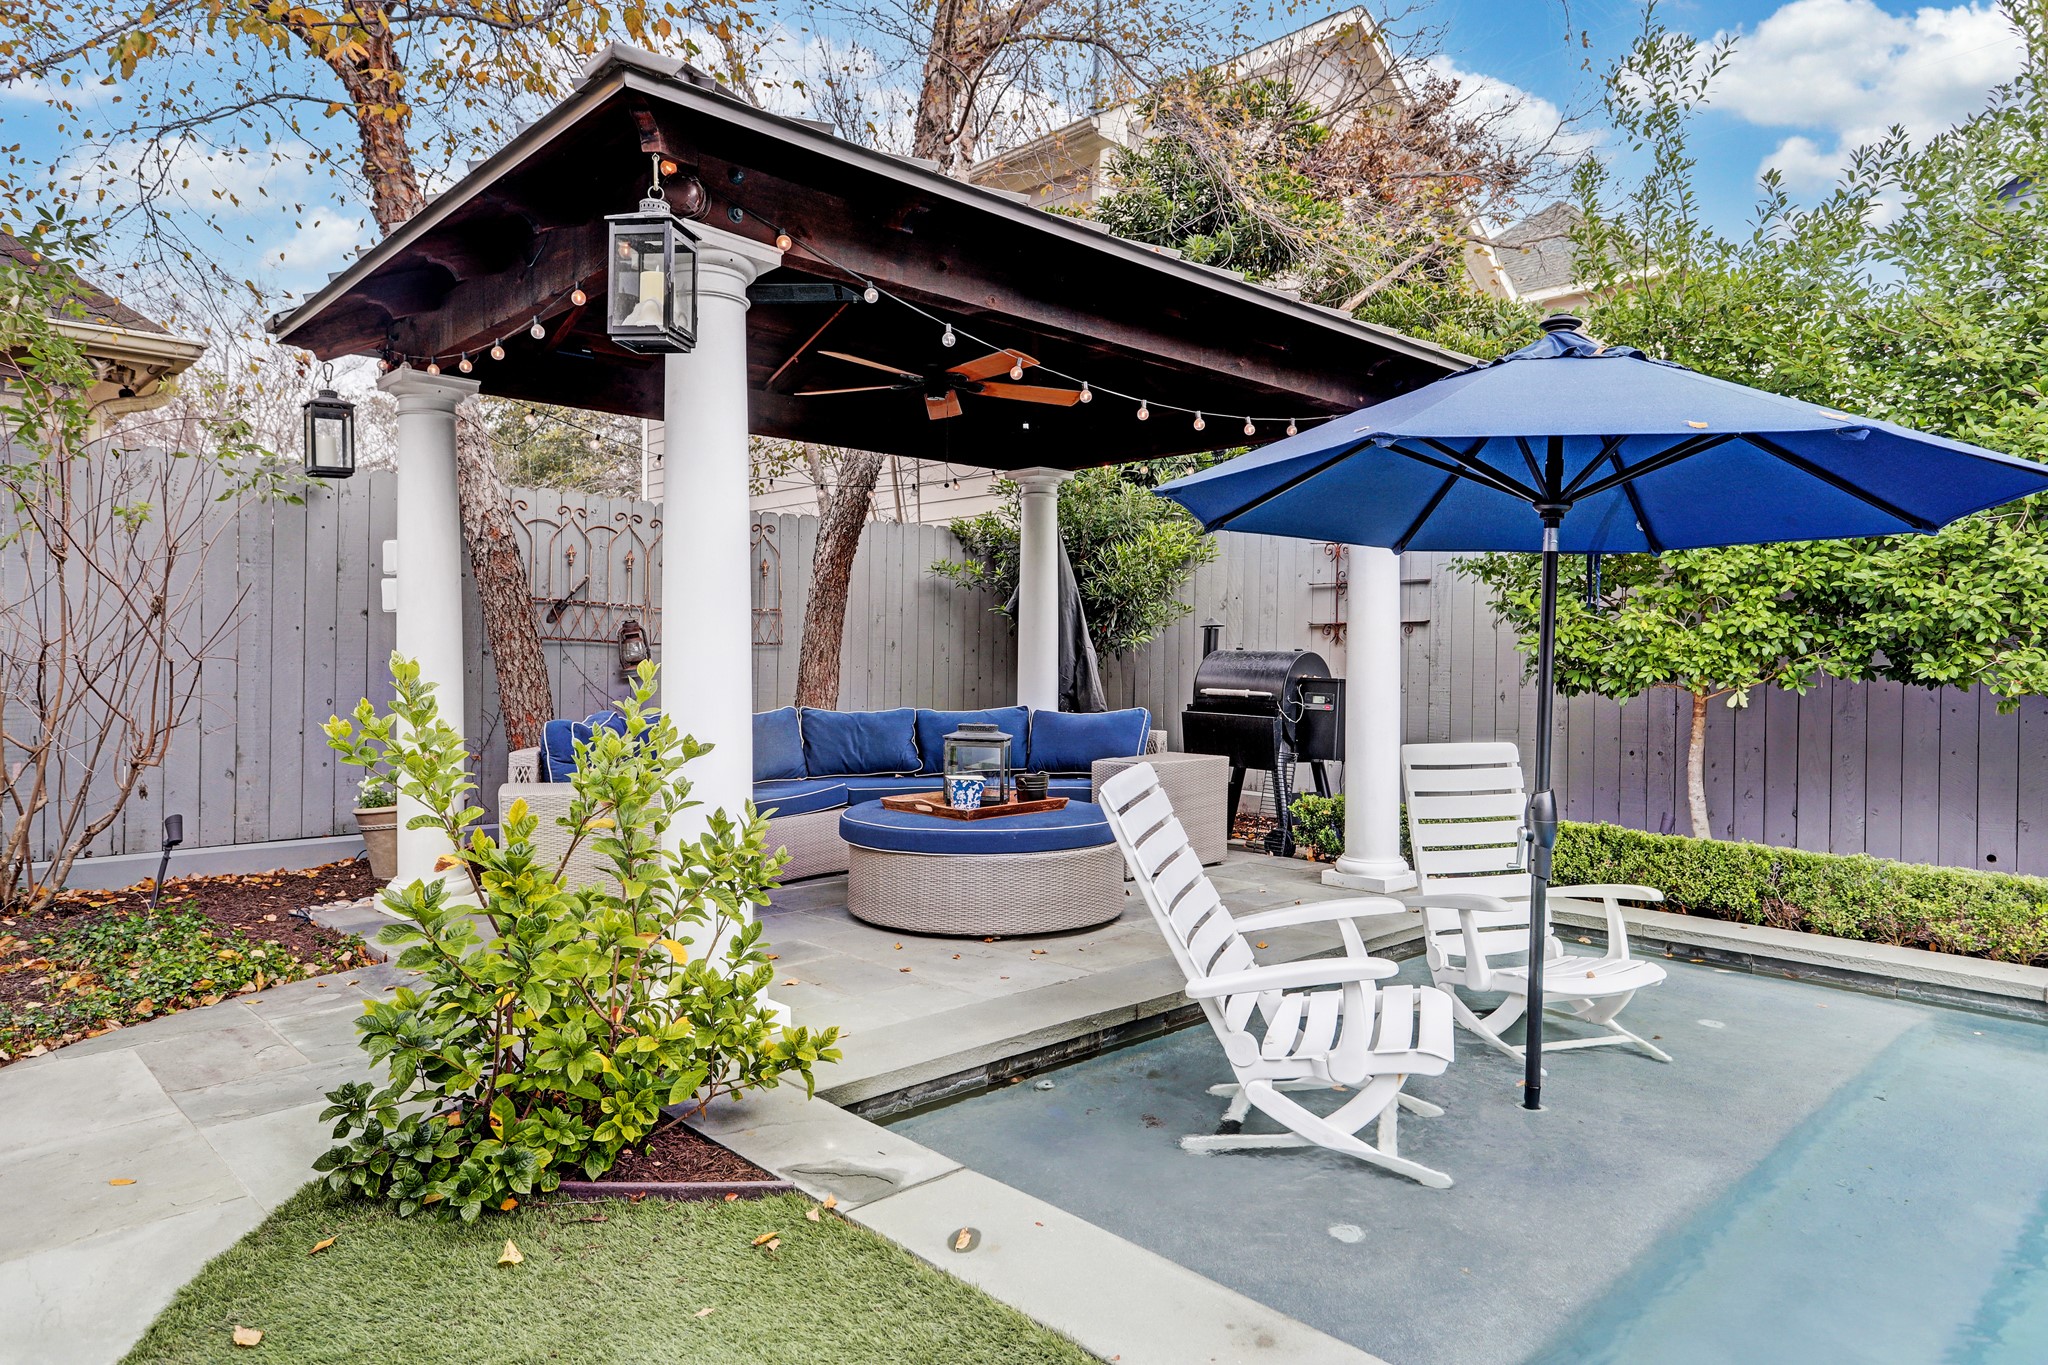 The covered outdoor pergola has plenty of space for lounging and has a drop-down tv built into the structure.